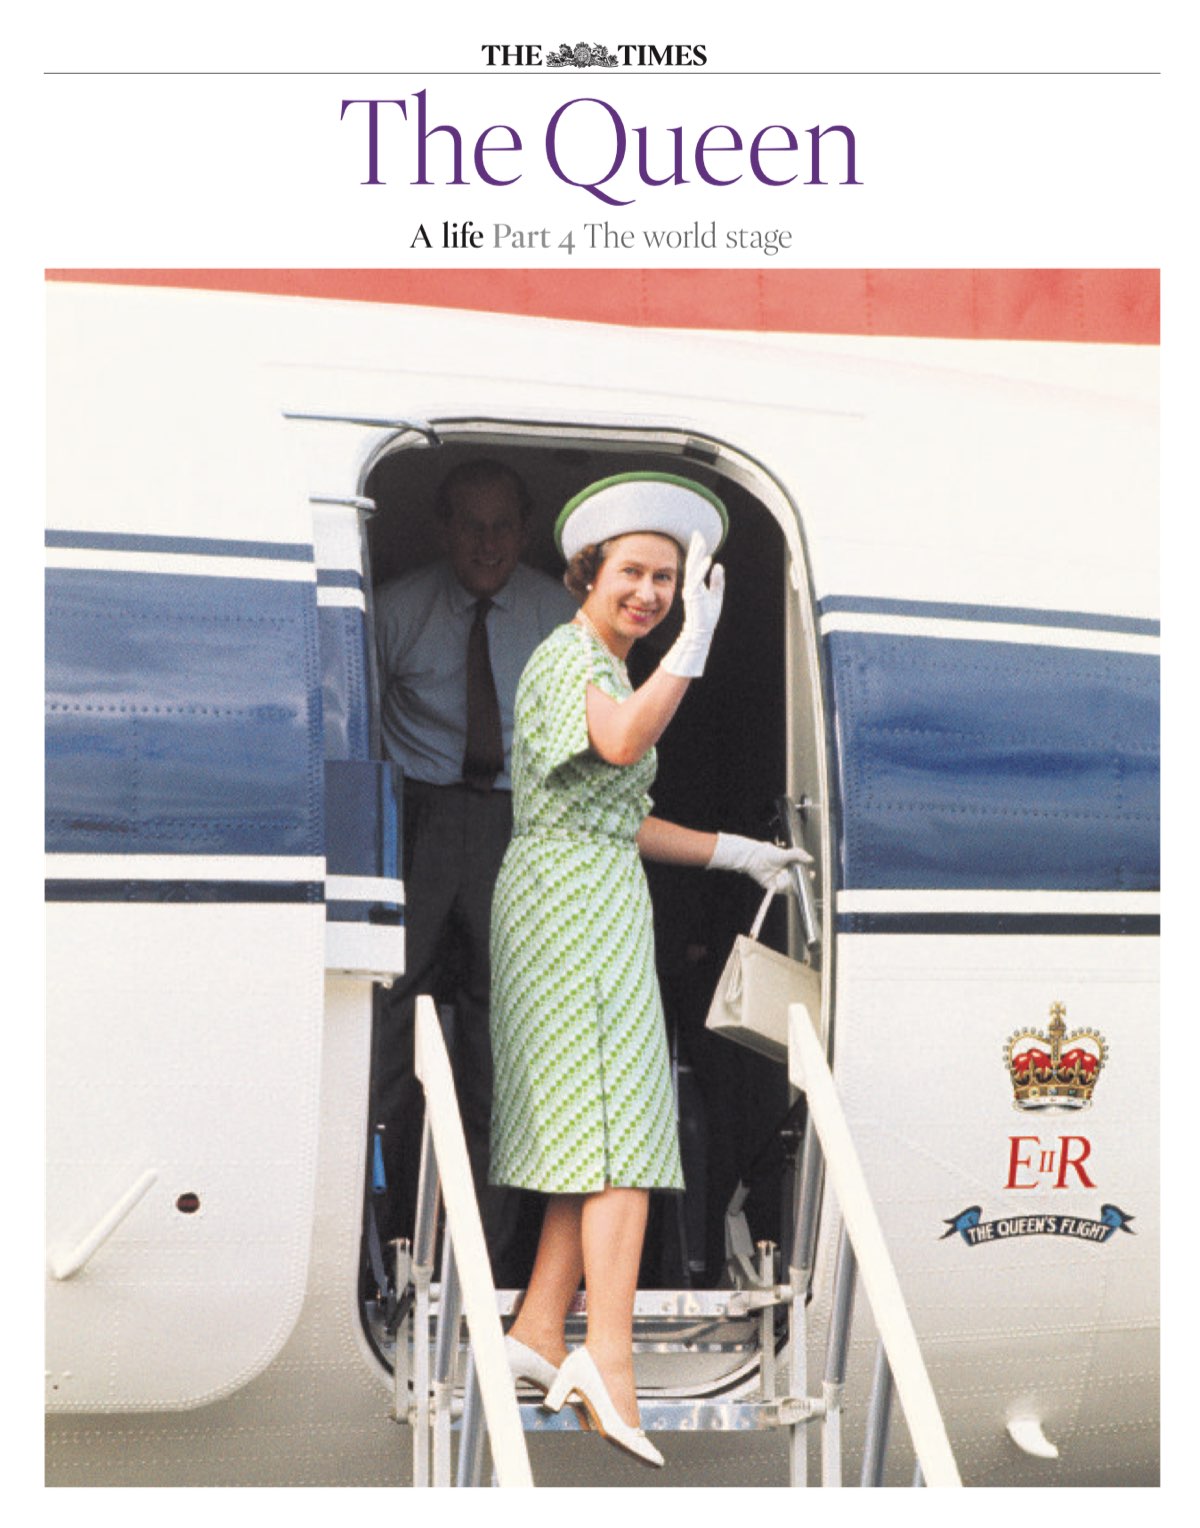 The Queen, A Life Part 3 & 4- [The Times, 13 Sep 2022]